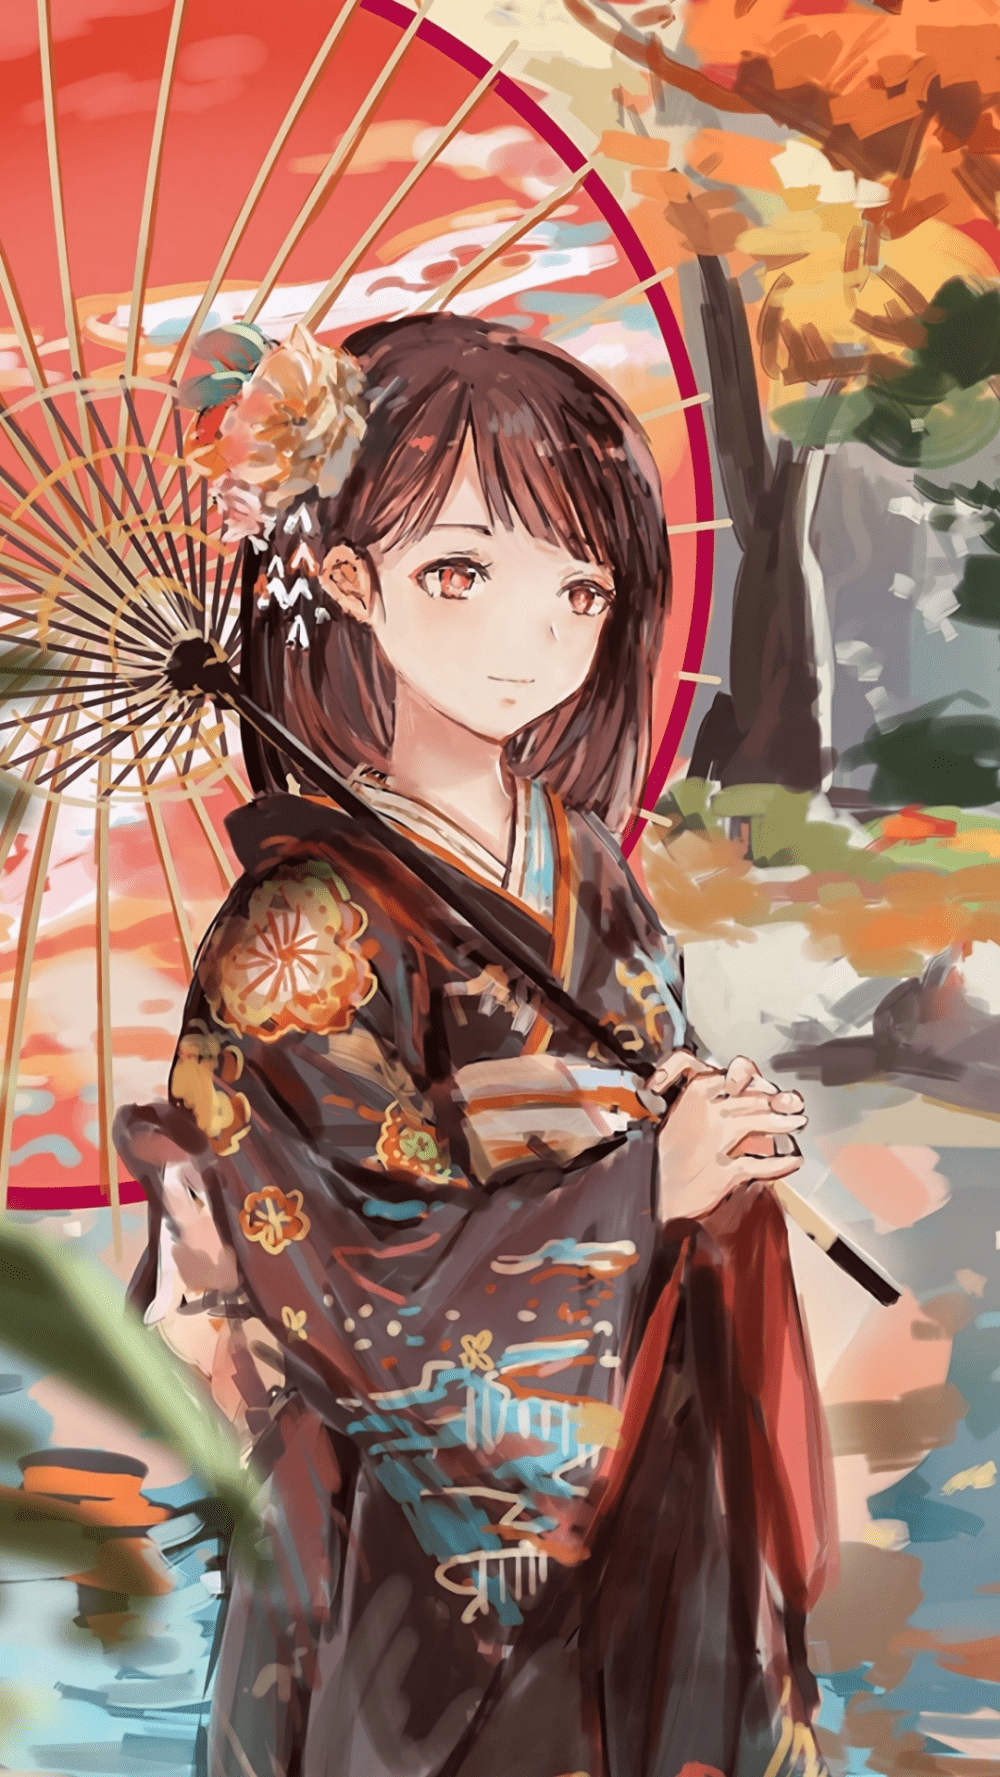 Get to Know Anime's Kimono: Which Characters of Japanese Anime have  Attractive Kimono?